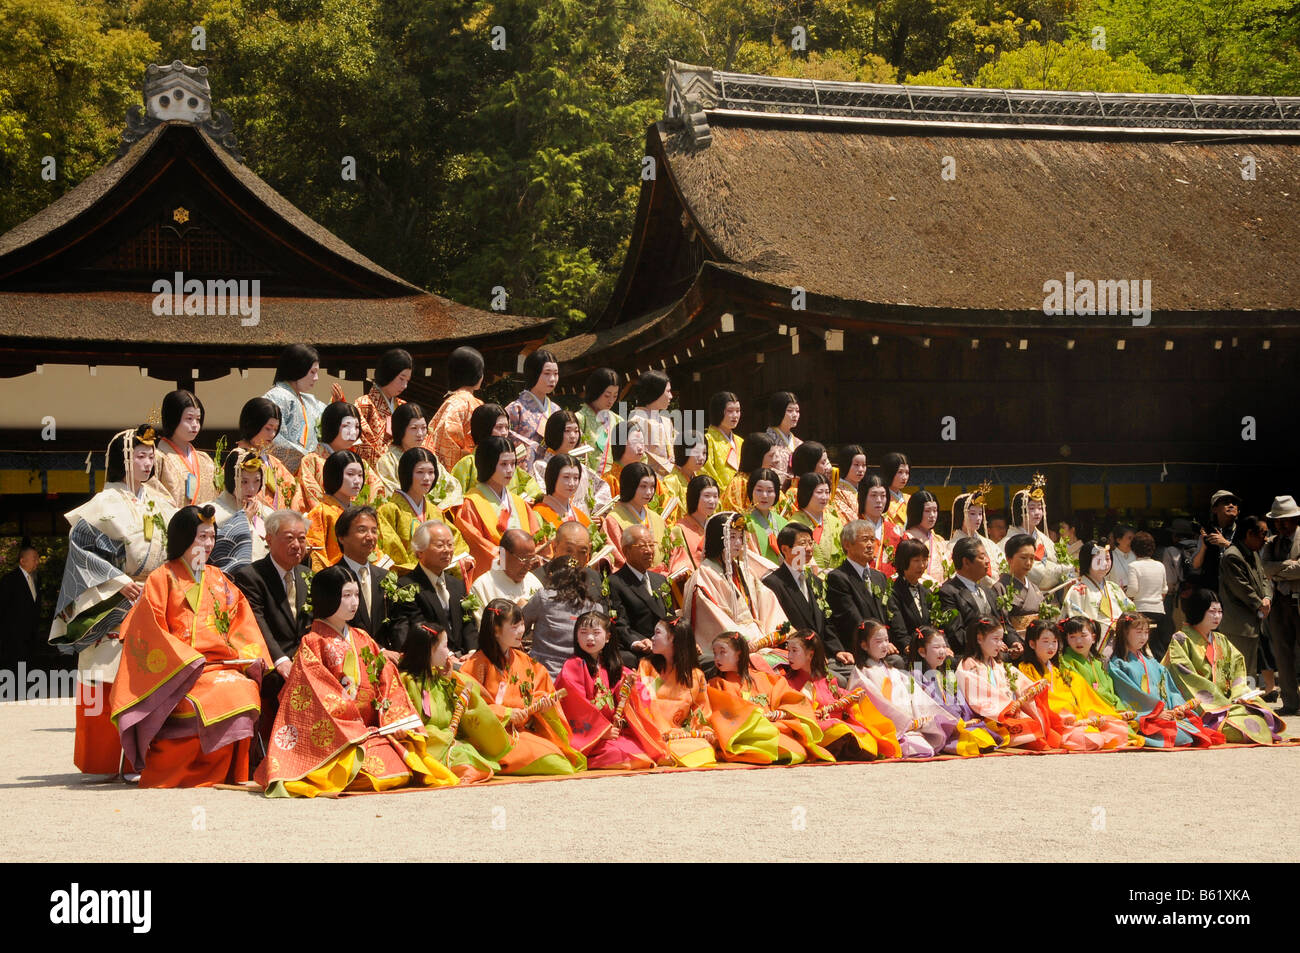 Royal household wearing traditional costumes of the Heian Period at the Aoi Festival, Kyoto, Japan, Asia Stock Photo